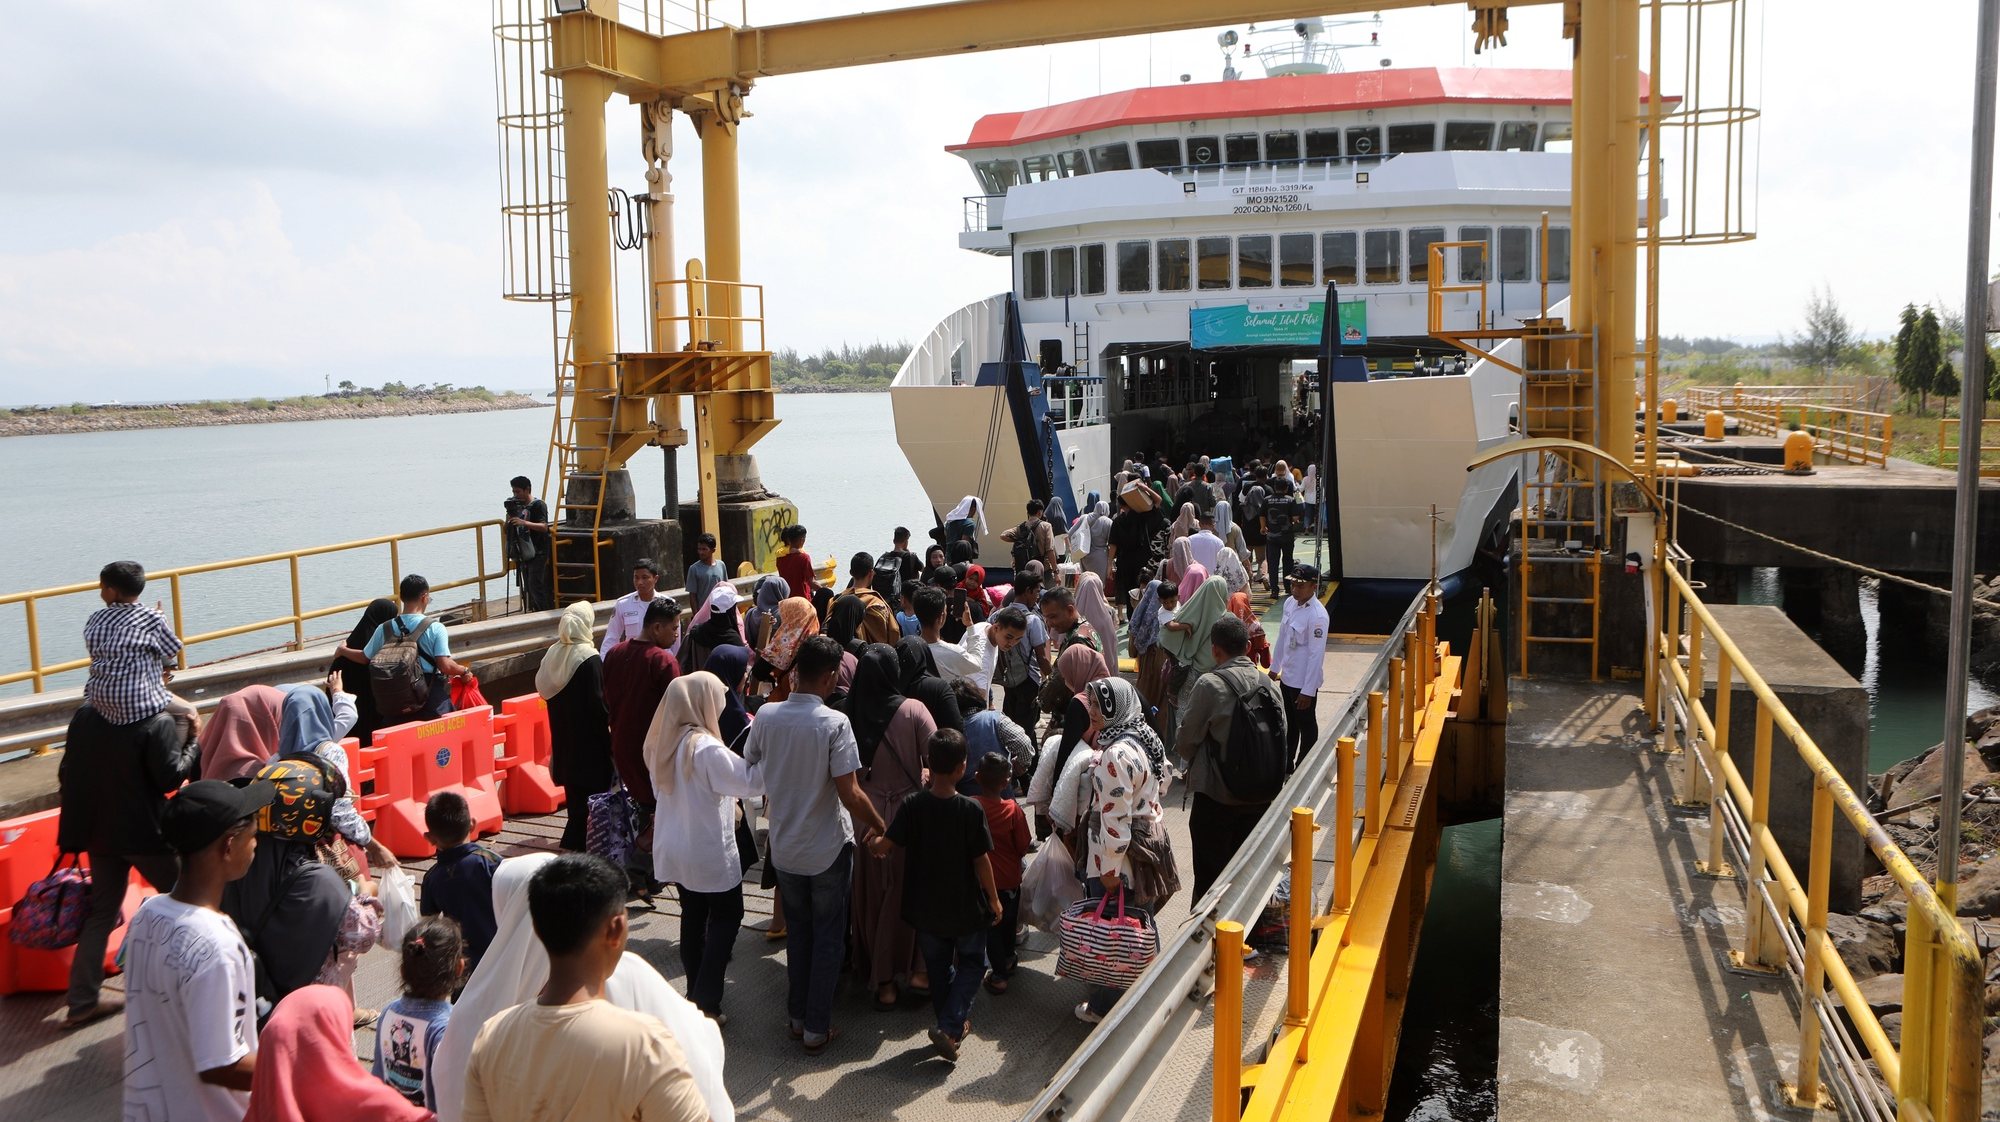 epa10591720 Passengers board the ferry before sailing across the sea at Ulee Lheue port in Banda Aceh, Indonesia, 26 April 2023. Thousands of people are making their return home journey after the Eid al-Fitr holiday.  EPA/HOTLI SIMANJUNTAK